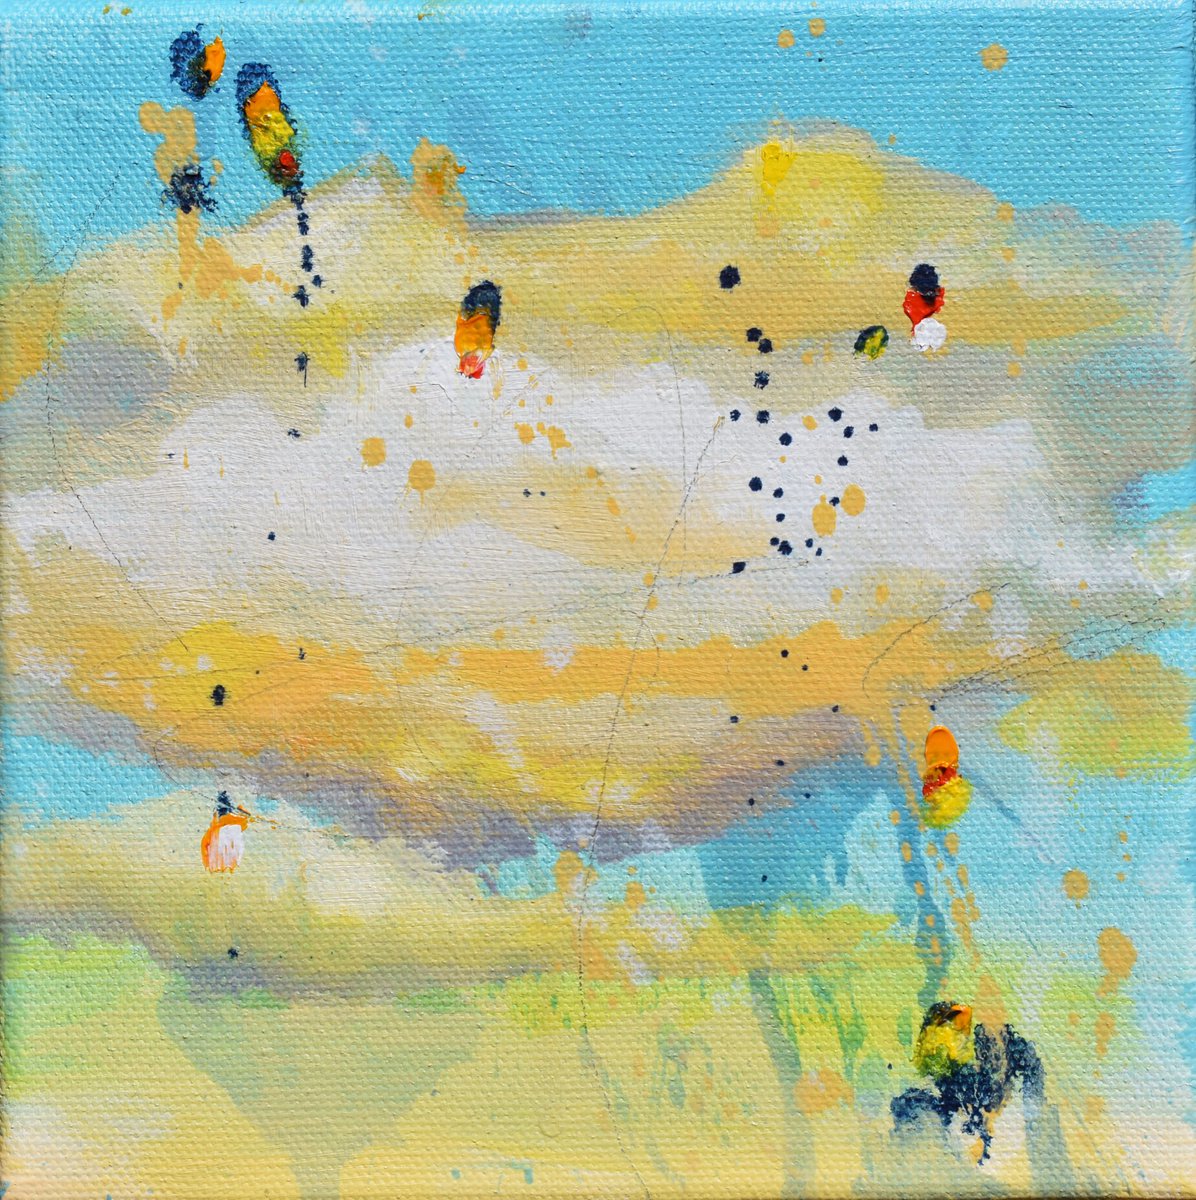 Color of Dreams - 6 x 6 IN / 15 x 15 CM - Oil Painting on Canvas, Ready to Hang by Cynthia Ligeros